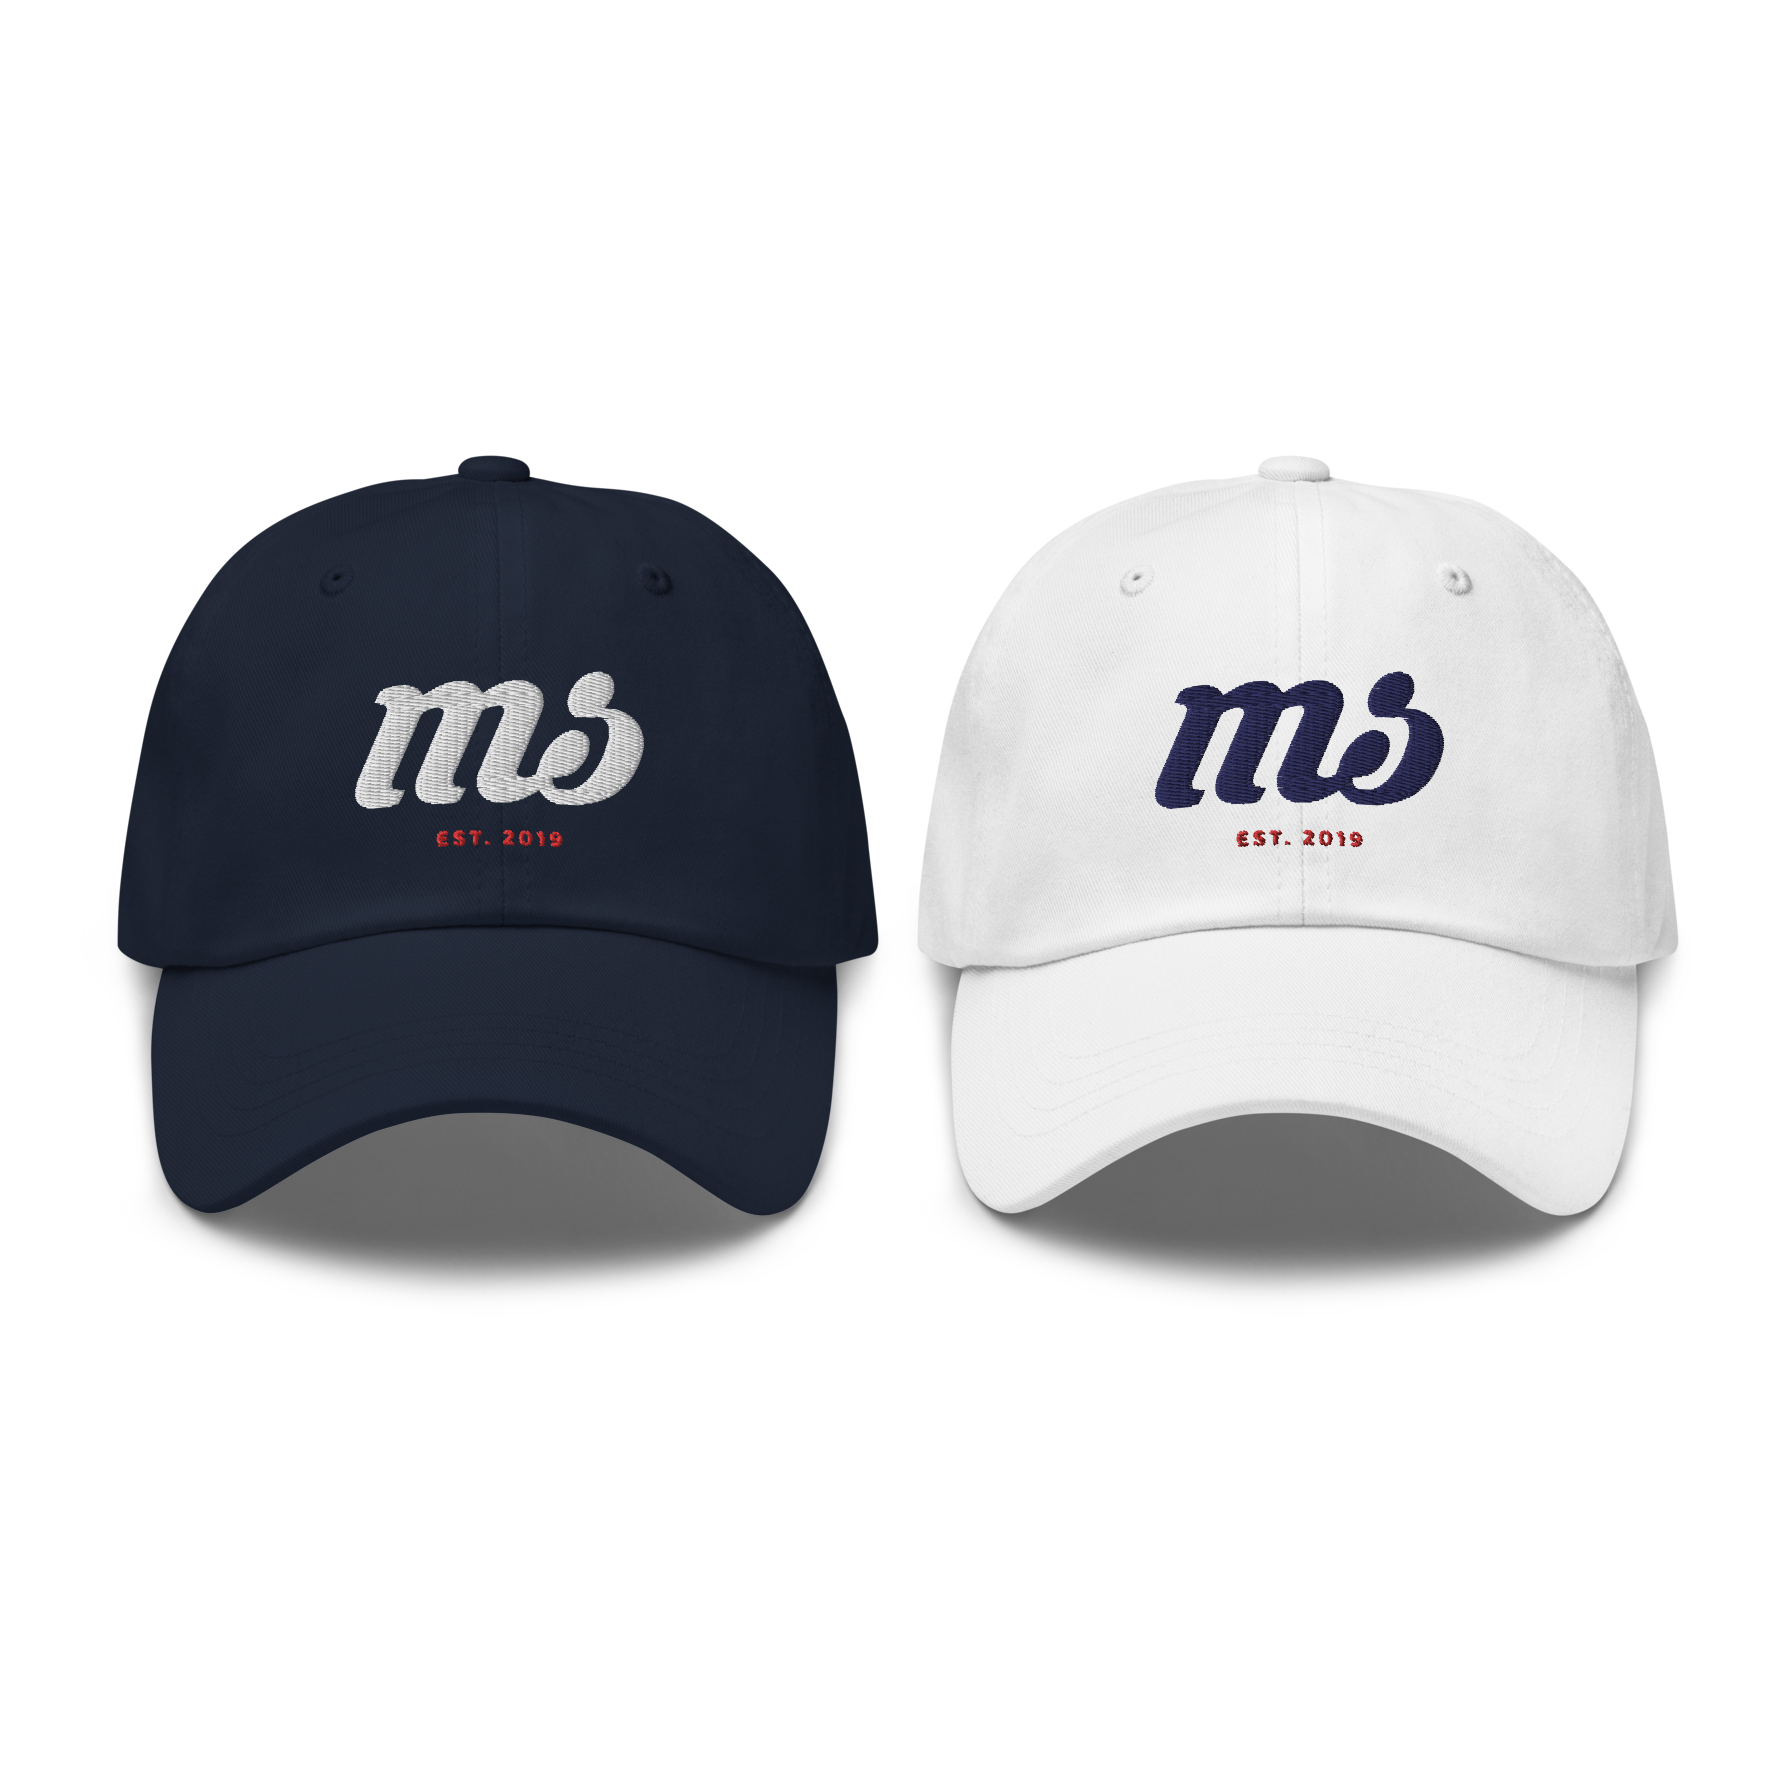 pack 2 gorras iniciales